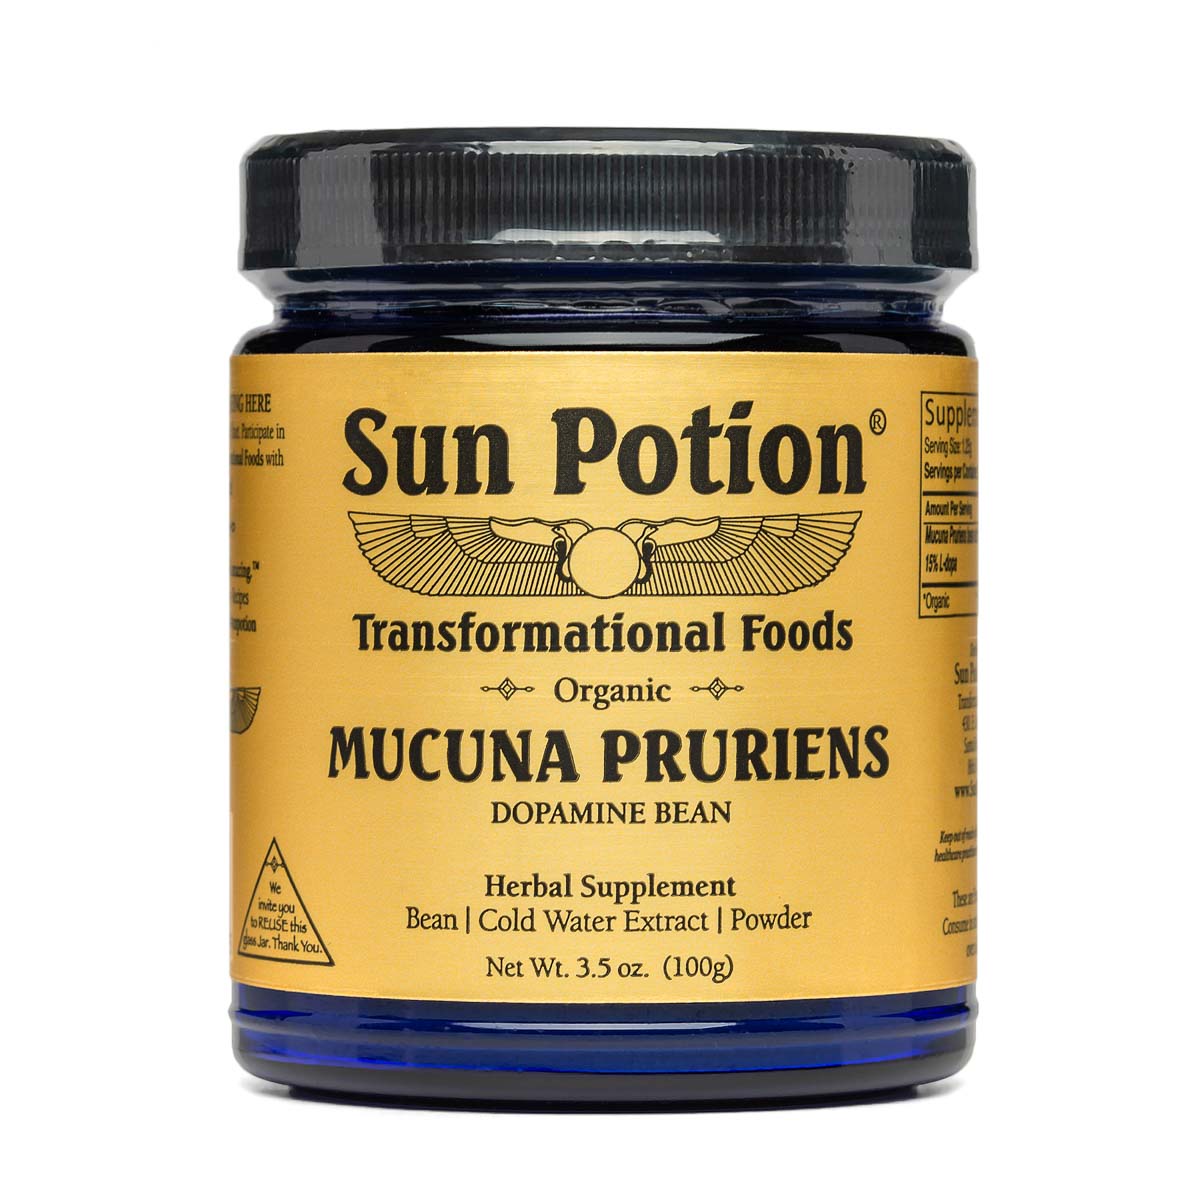 Mucuna Pruriens Powder | Sun Potion | Raw Living UK | Tonic Herbs | Sun Potion Mucuna Pruriens: known as the Dopamine Bean. This Superior Extract Powder from Sun Potion contains 15% L-DOPA, which is a precursor to Dopamine.